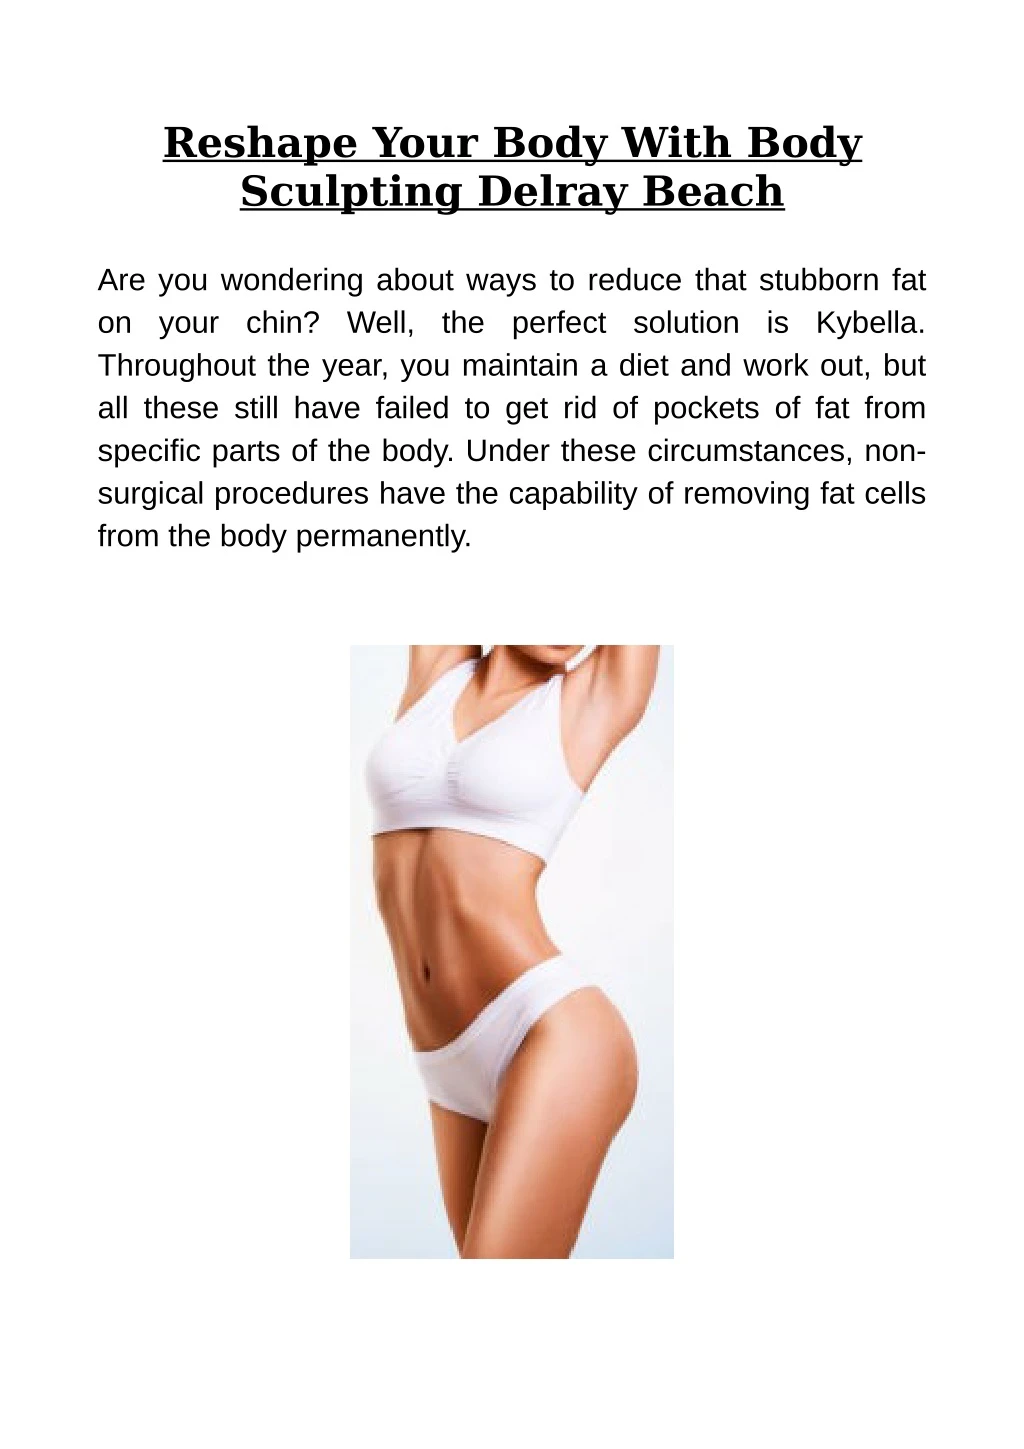 reshape your body with body sculpting delray beach